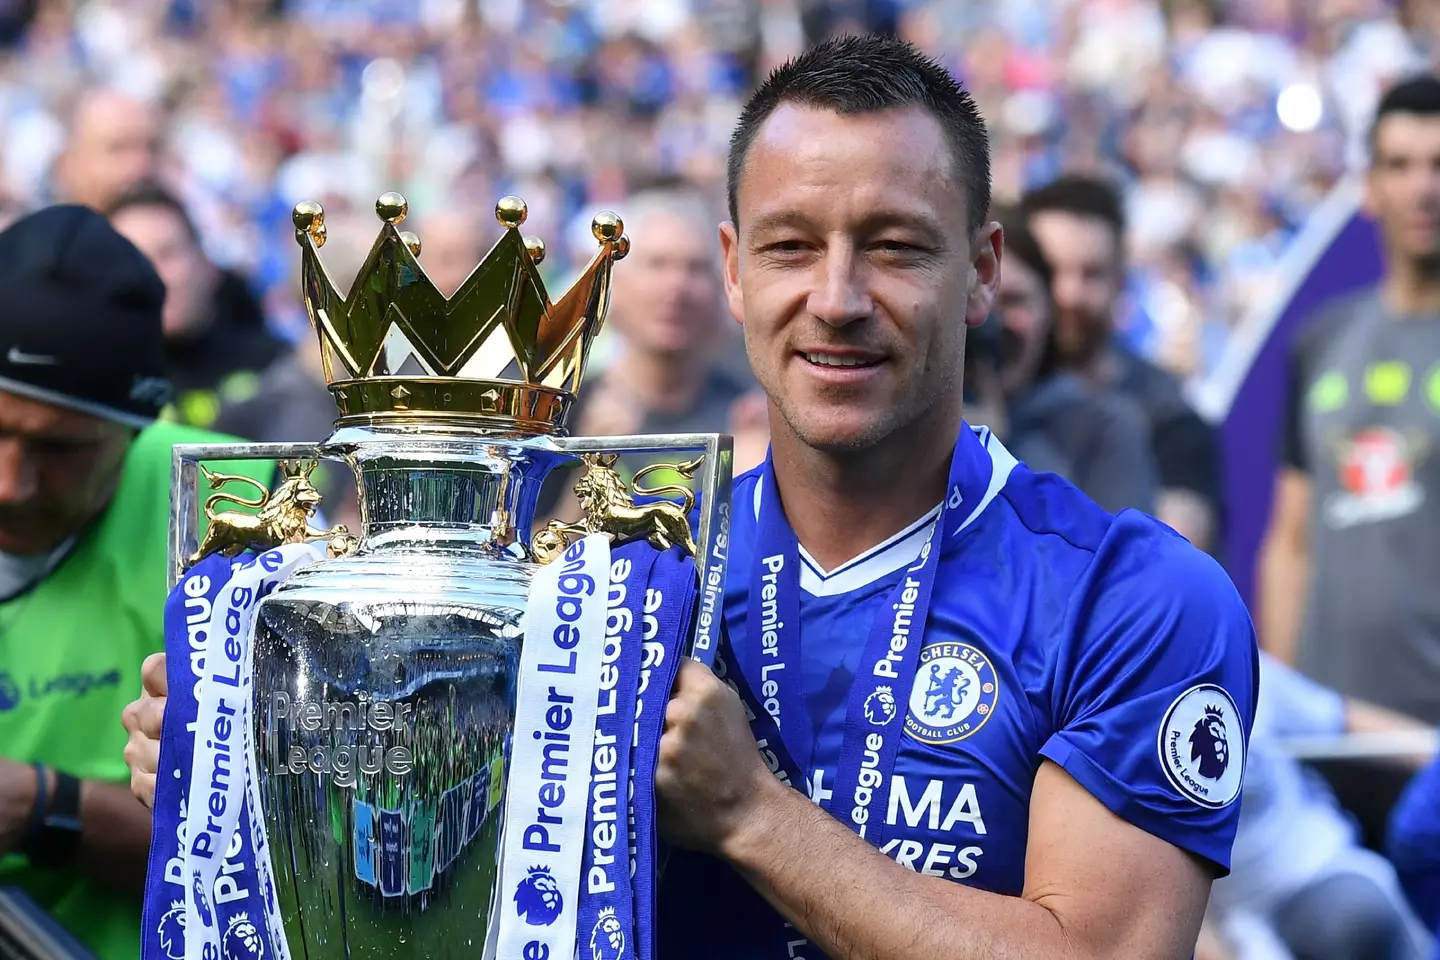 Terry spent 19 years with Chelsea. (Image